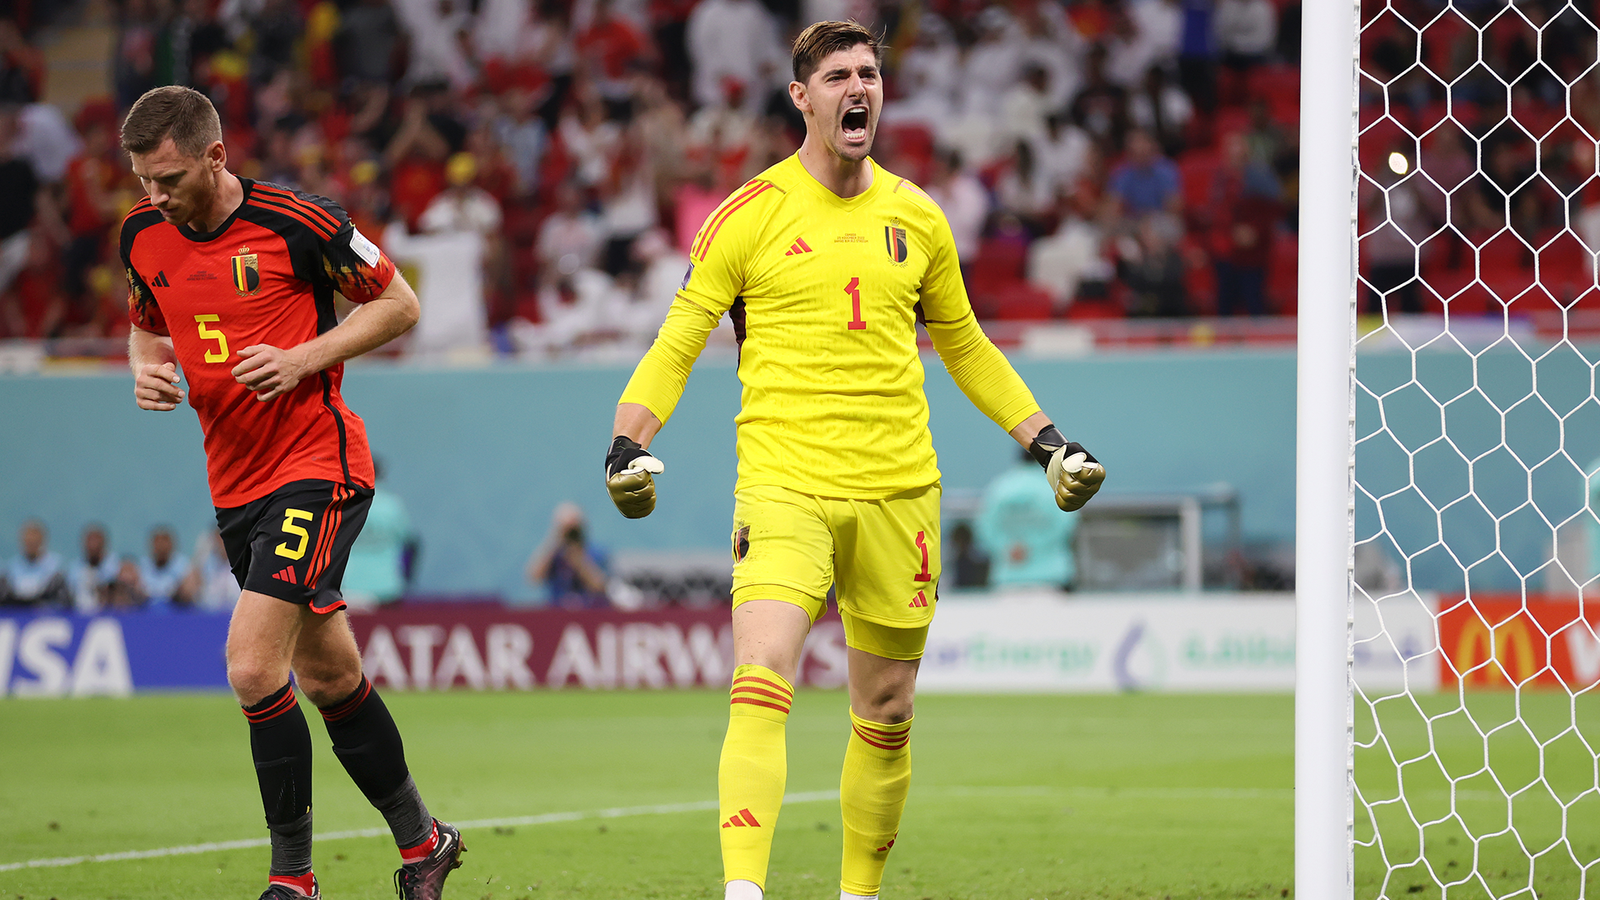 Thibaut Courtois saves Belgium by blocking a penalty kick attempt